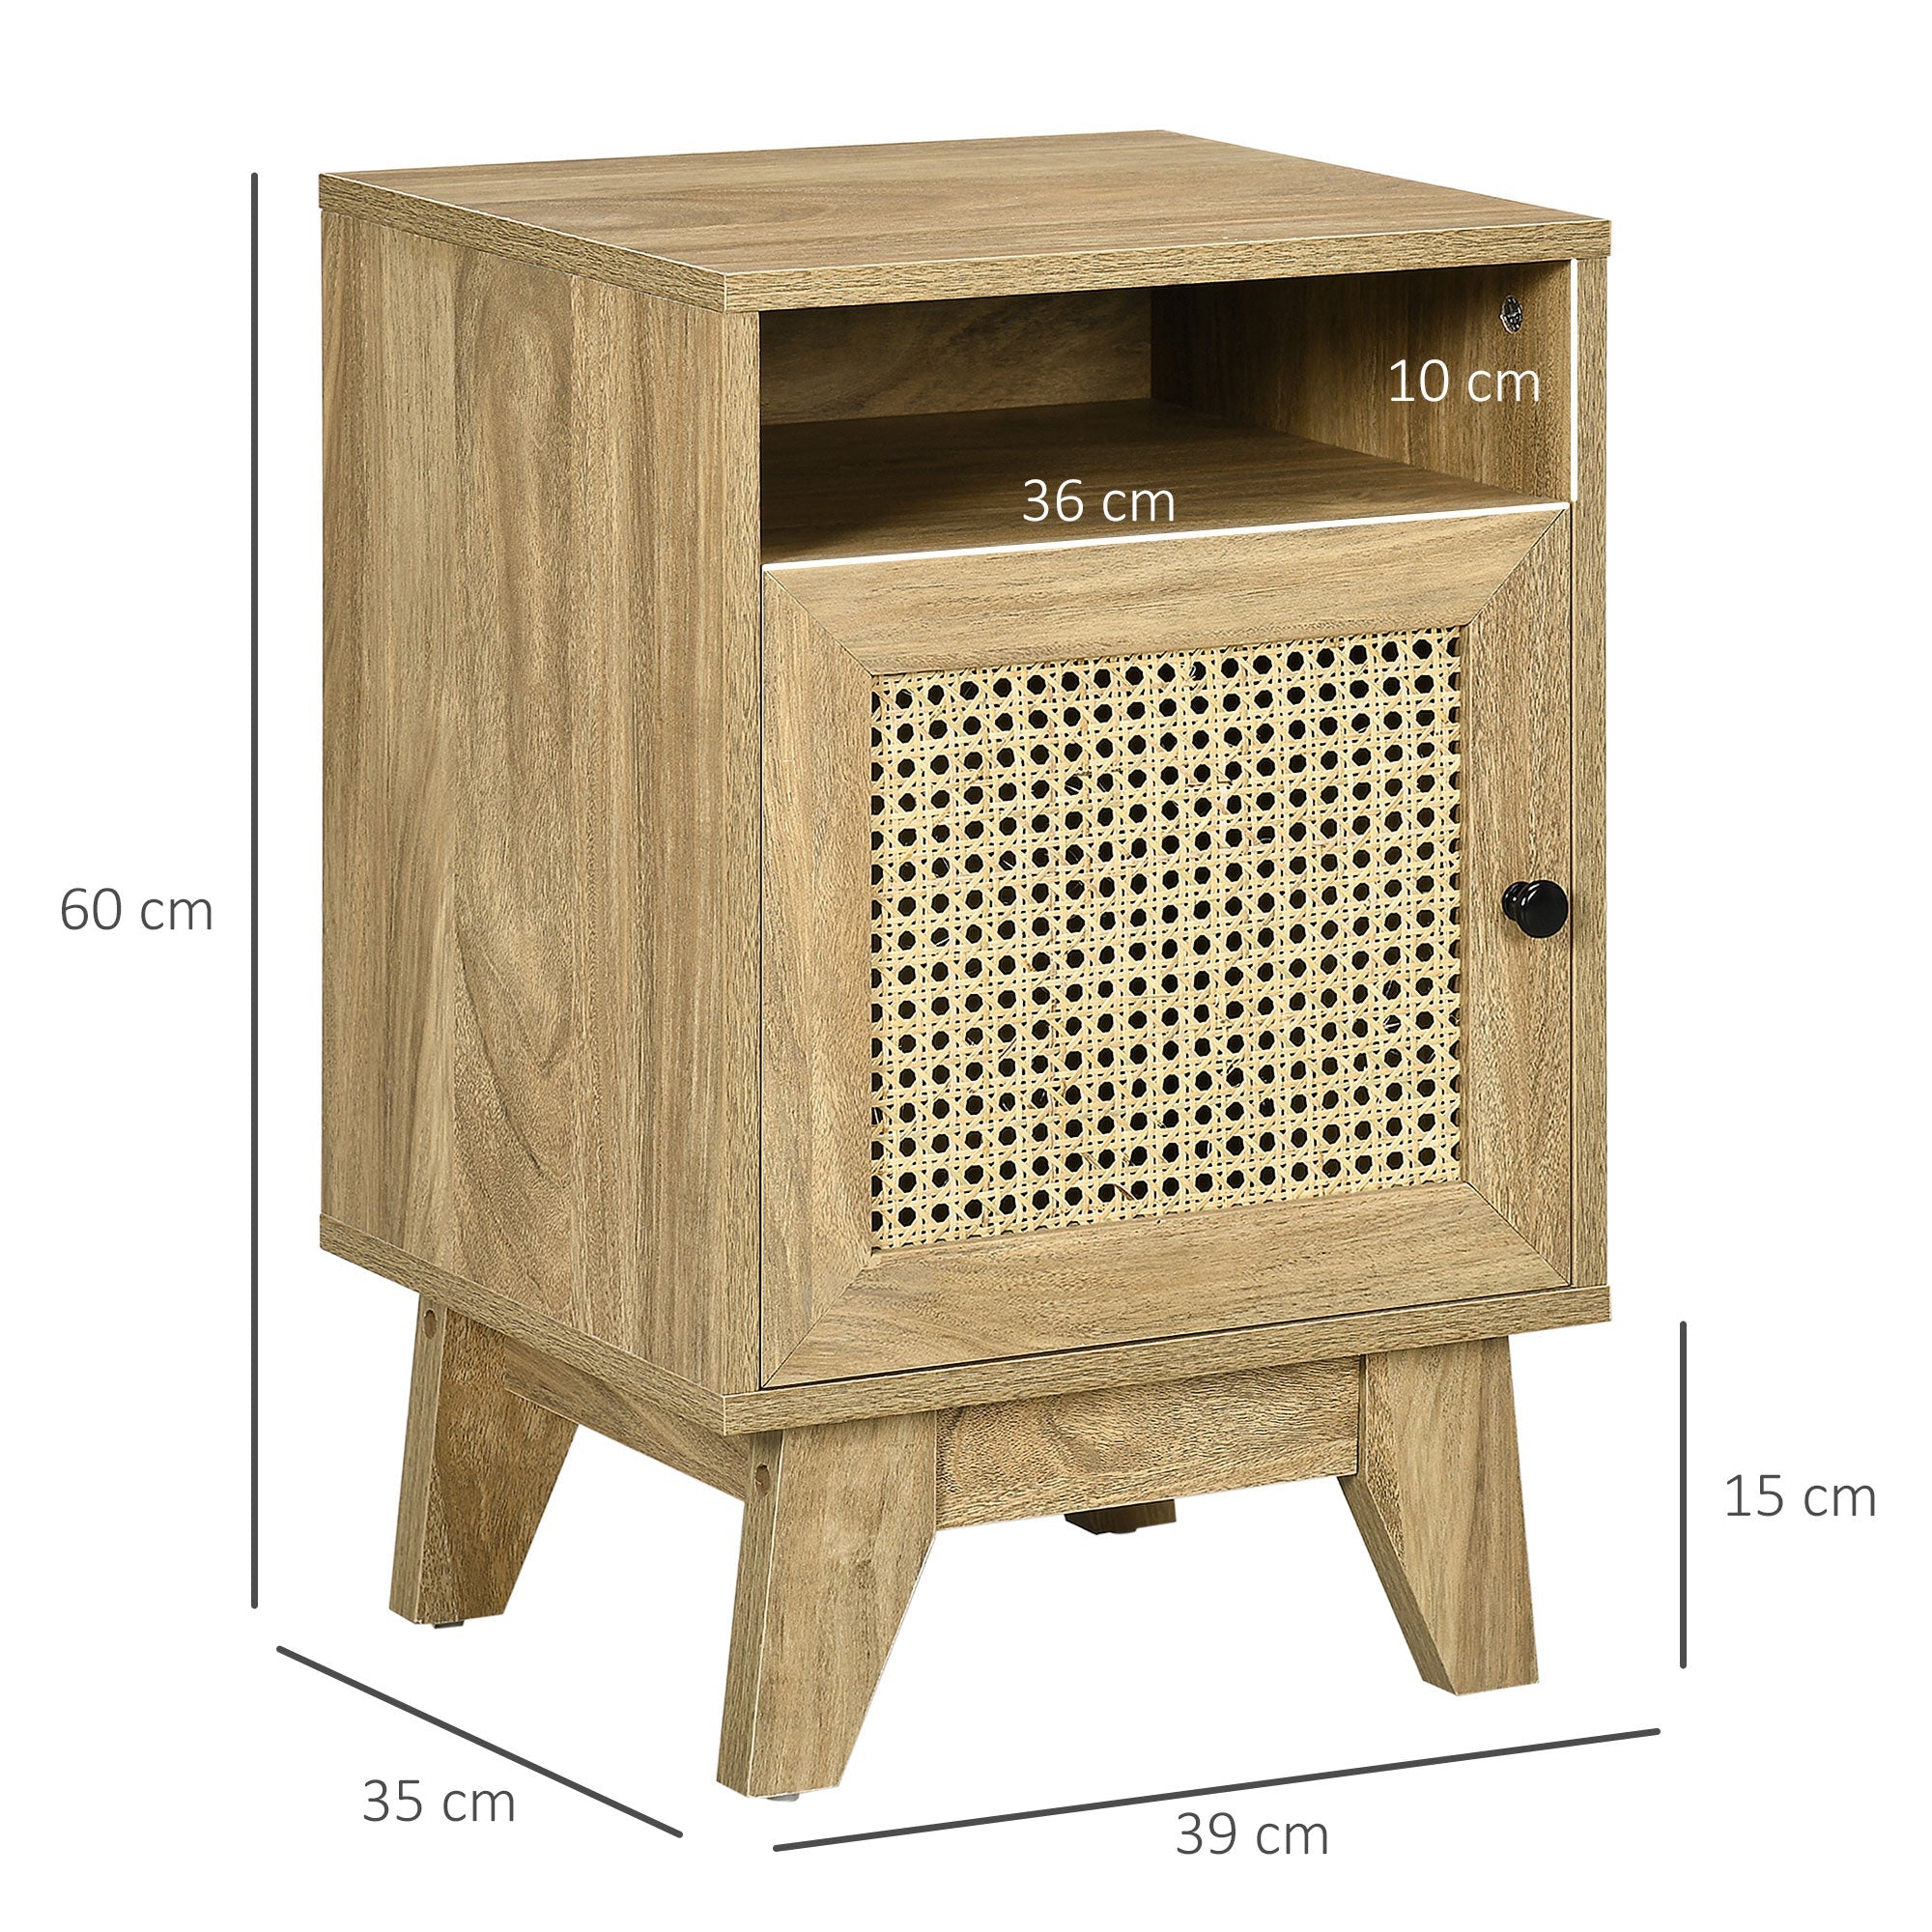 Bedside Table with Rattan Element, Side End Table with Shelf and Cupboard, 39cmx35cmx60cm, Natural-2